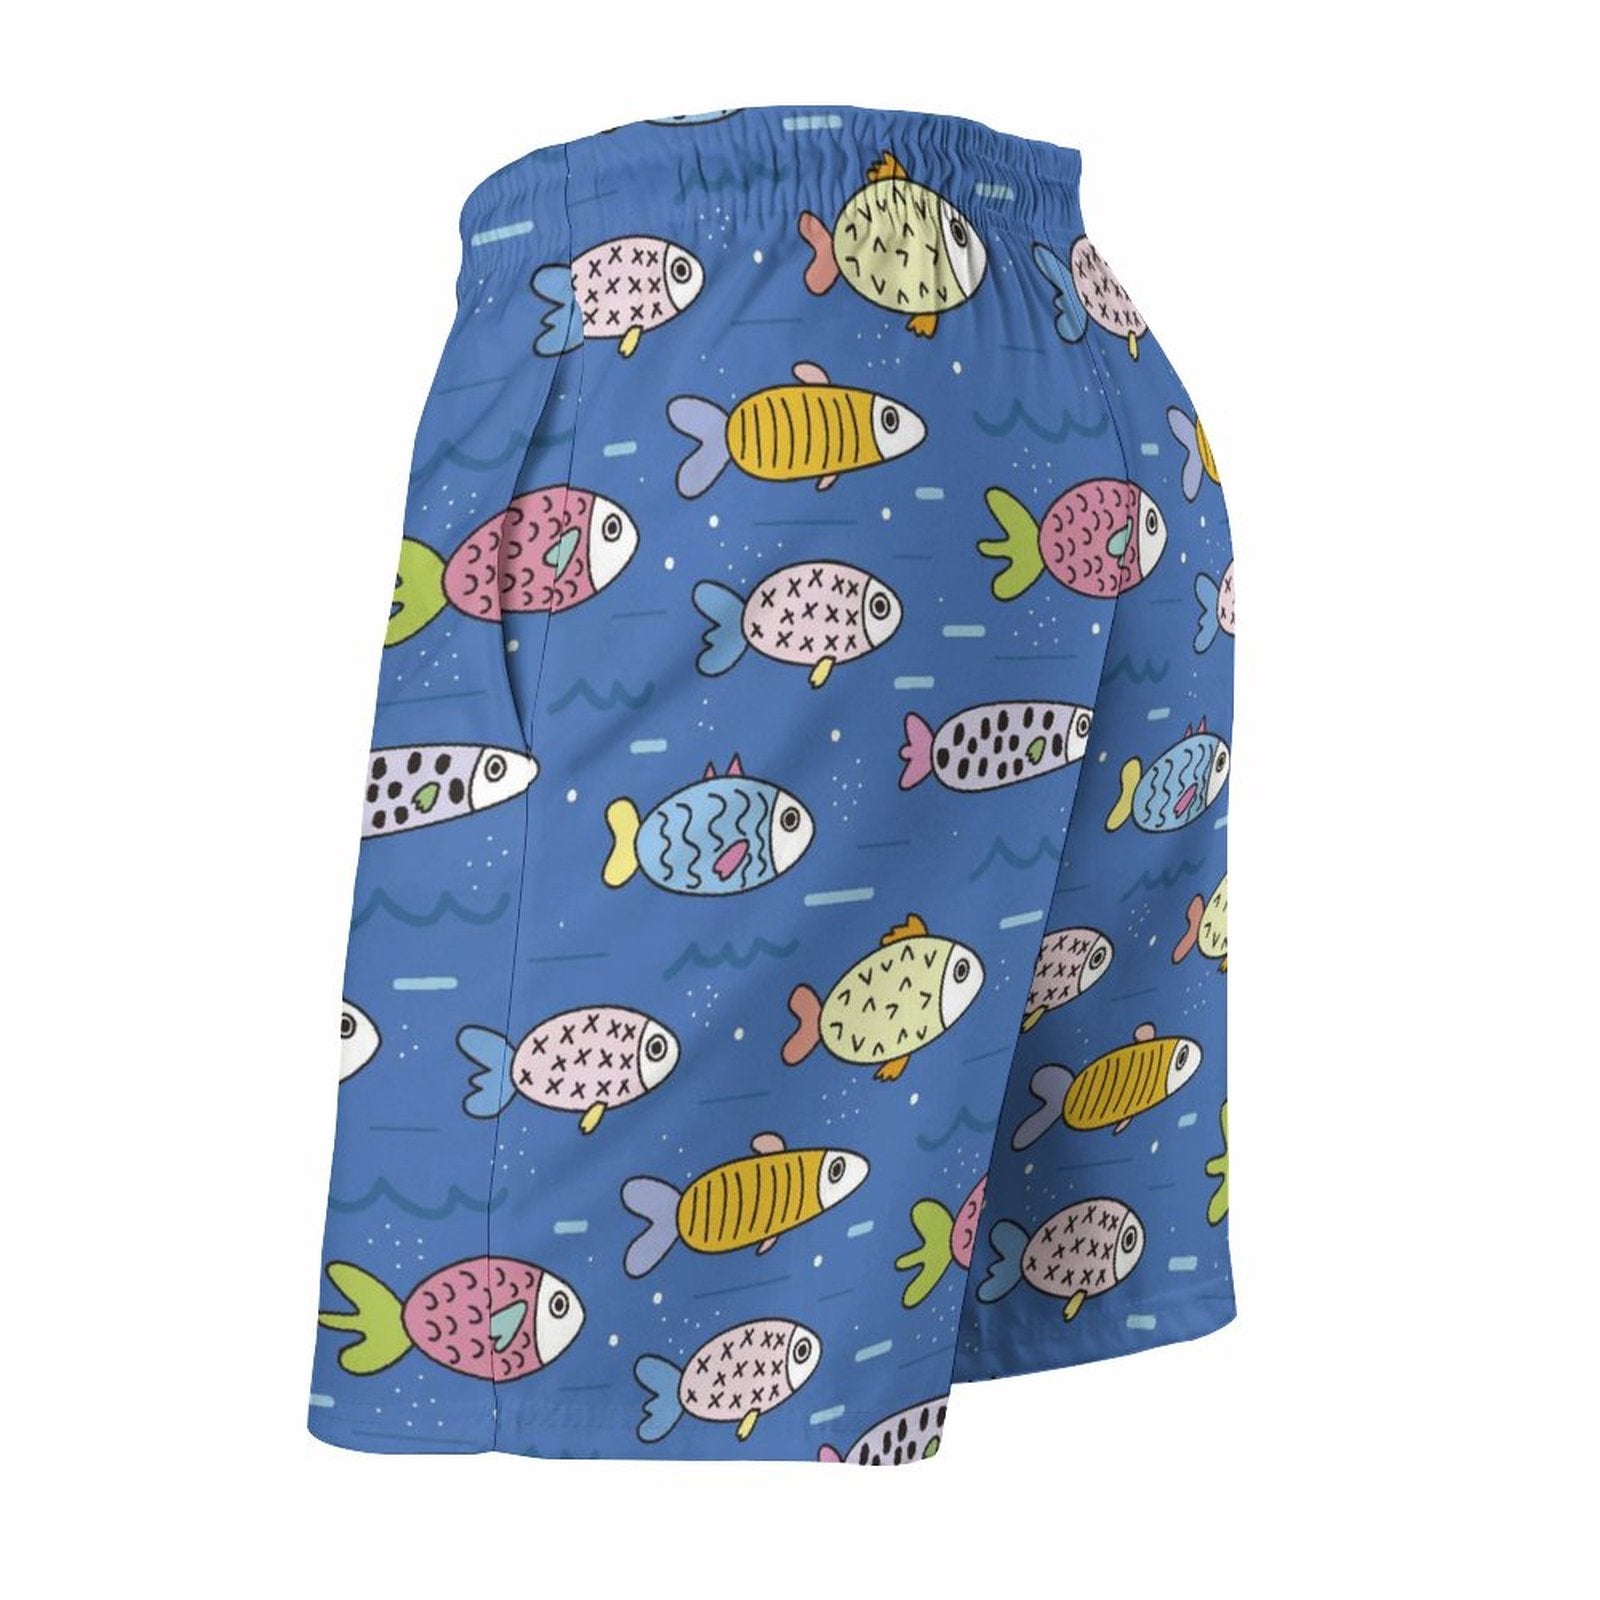 Men's Beach Pants Ocean Animal Jumping Dolphins Cute Jellyfish Boys's Casual Shorts with Pockets